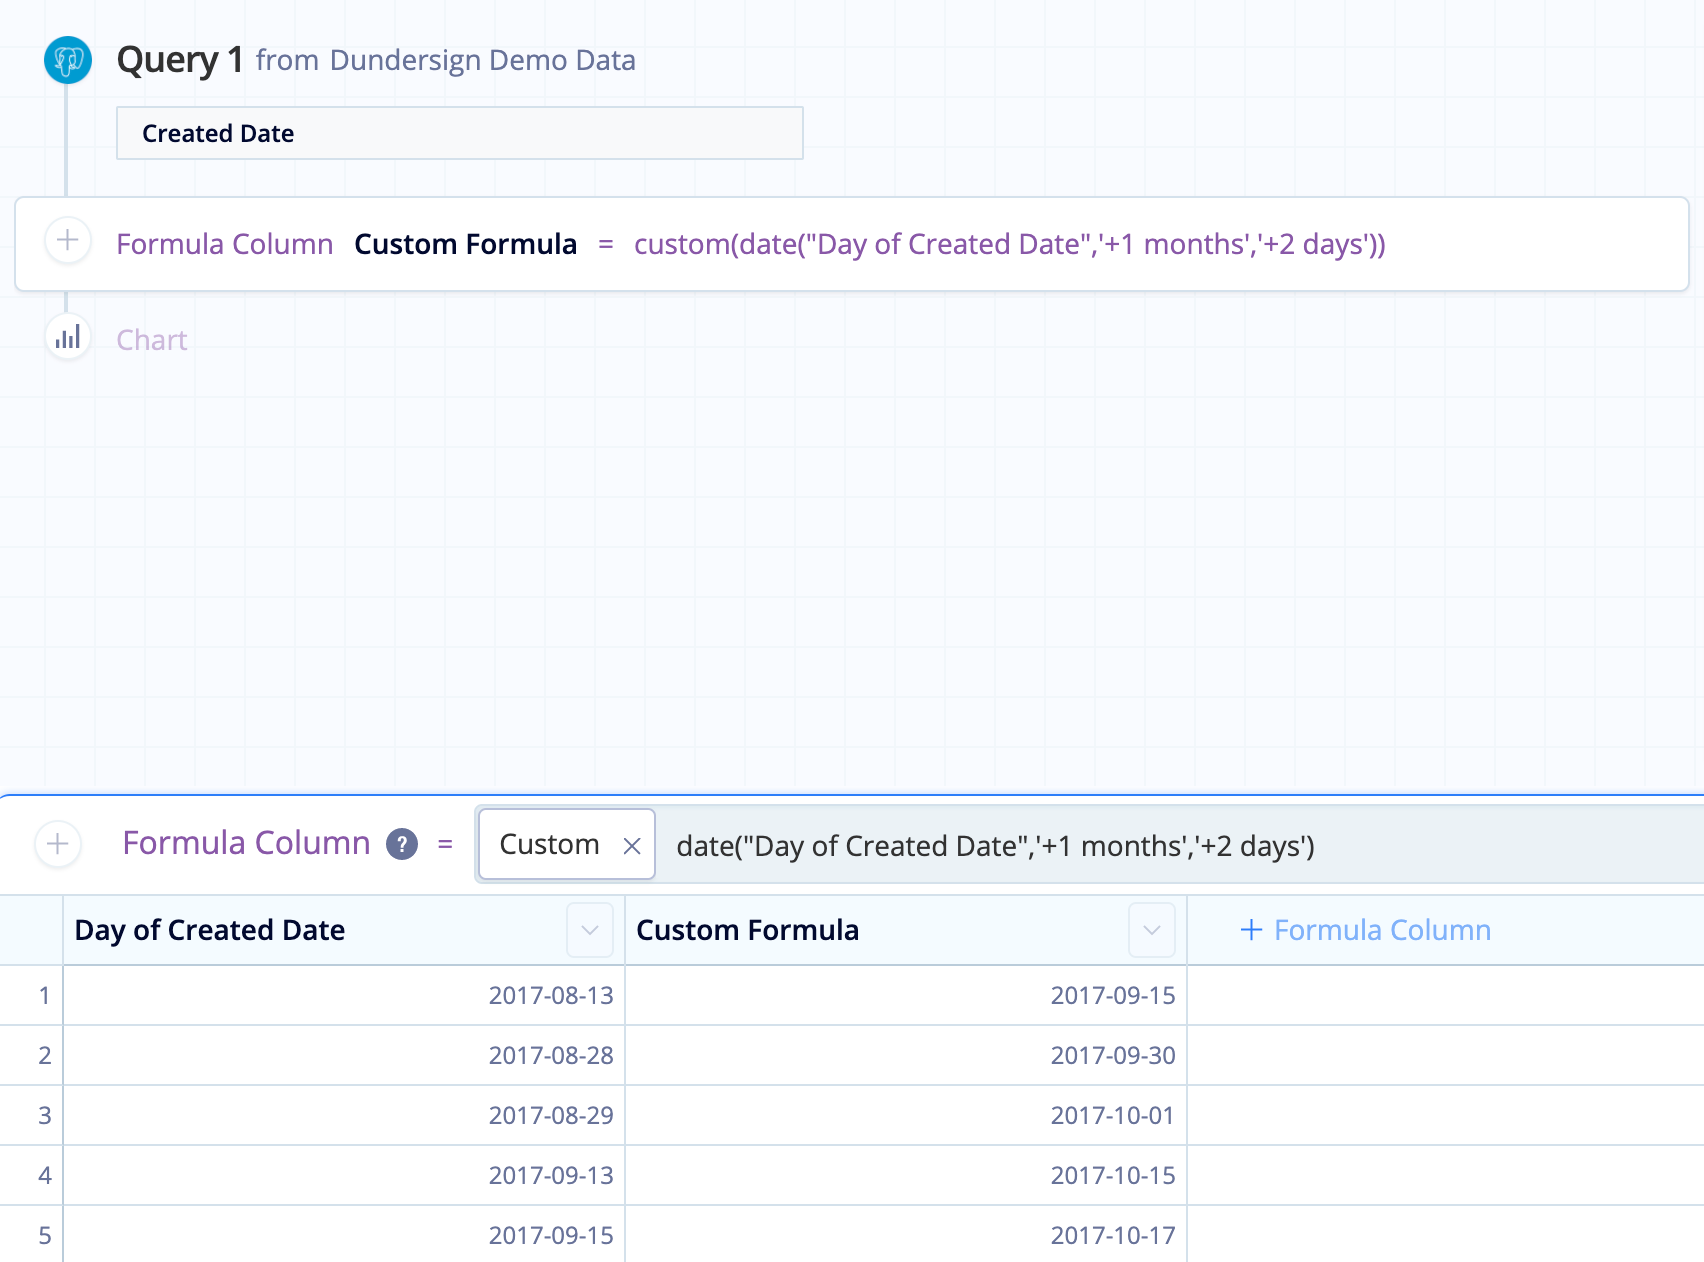 Use date modifiers to add 1 month and 2 days to the Day of Created Date column